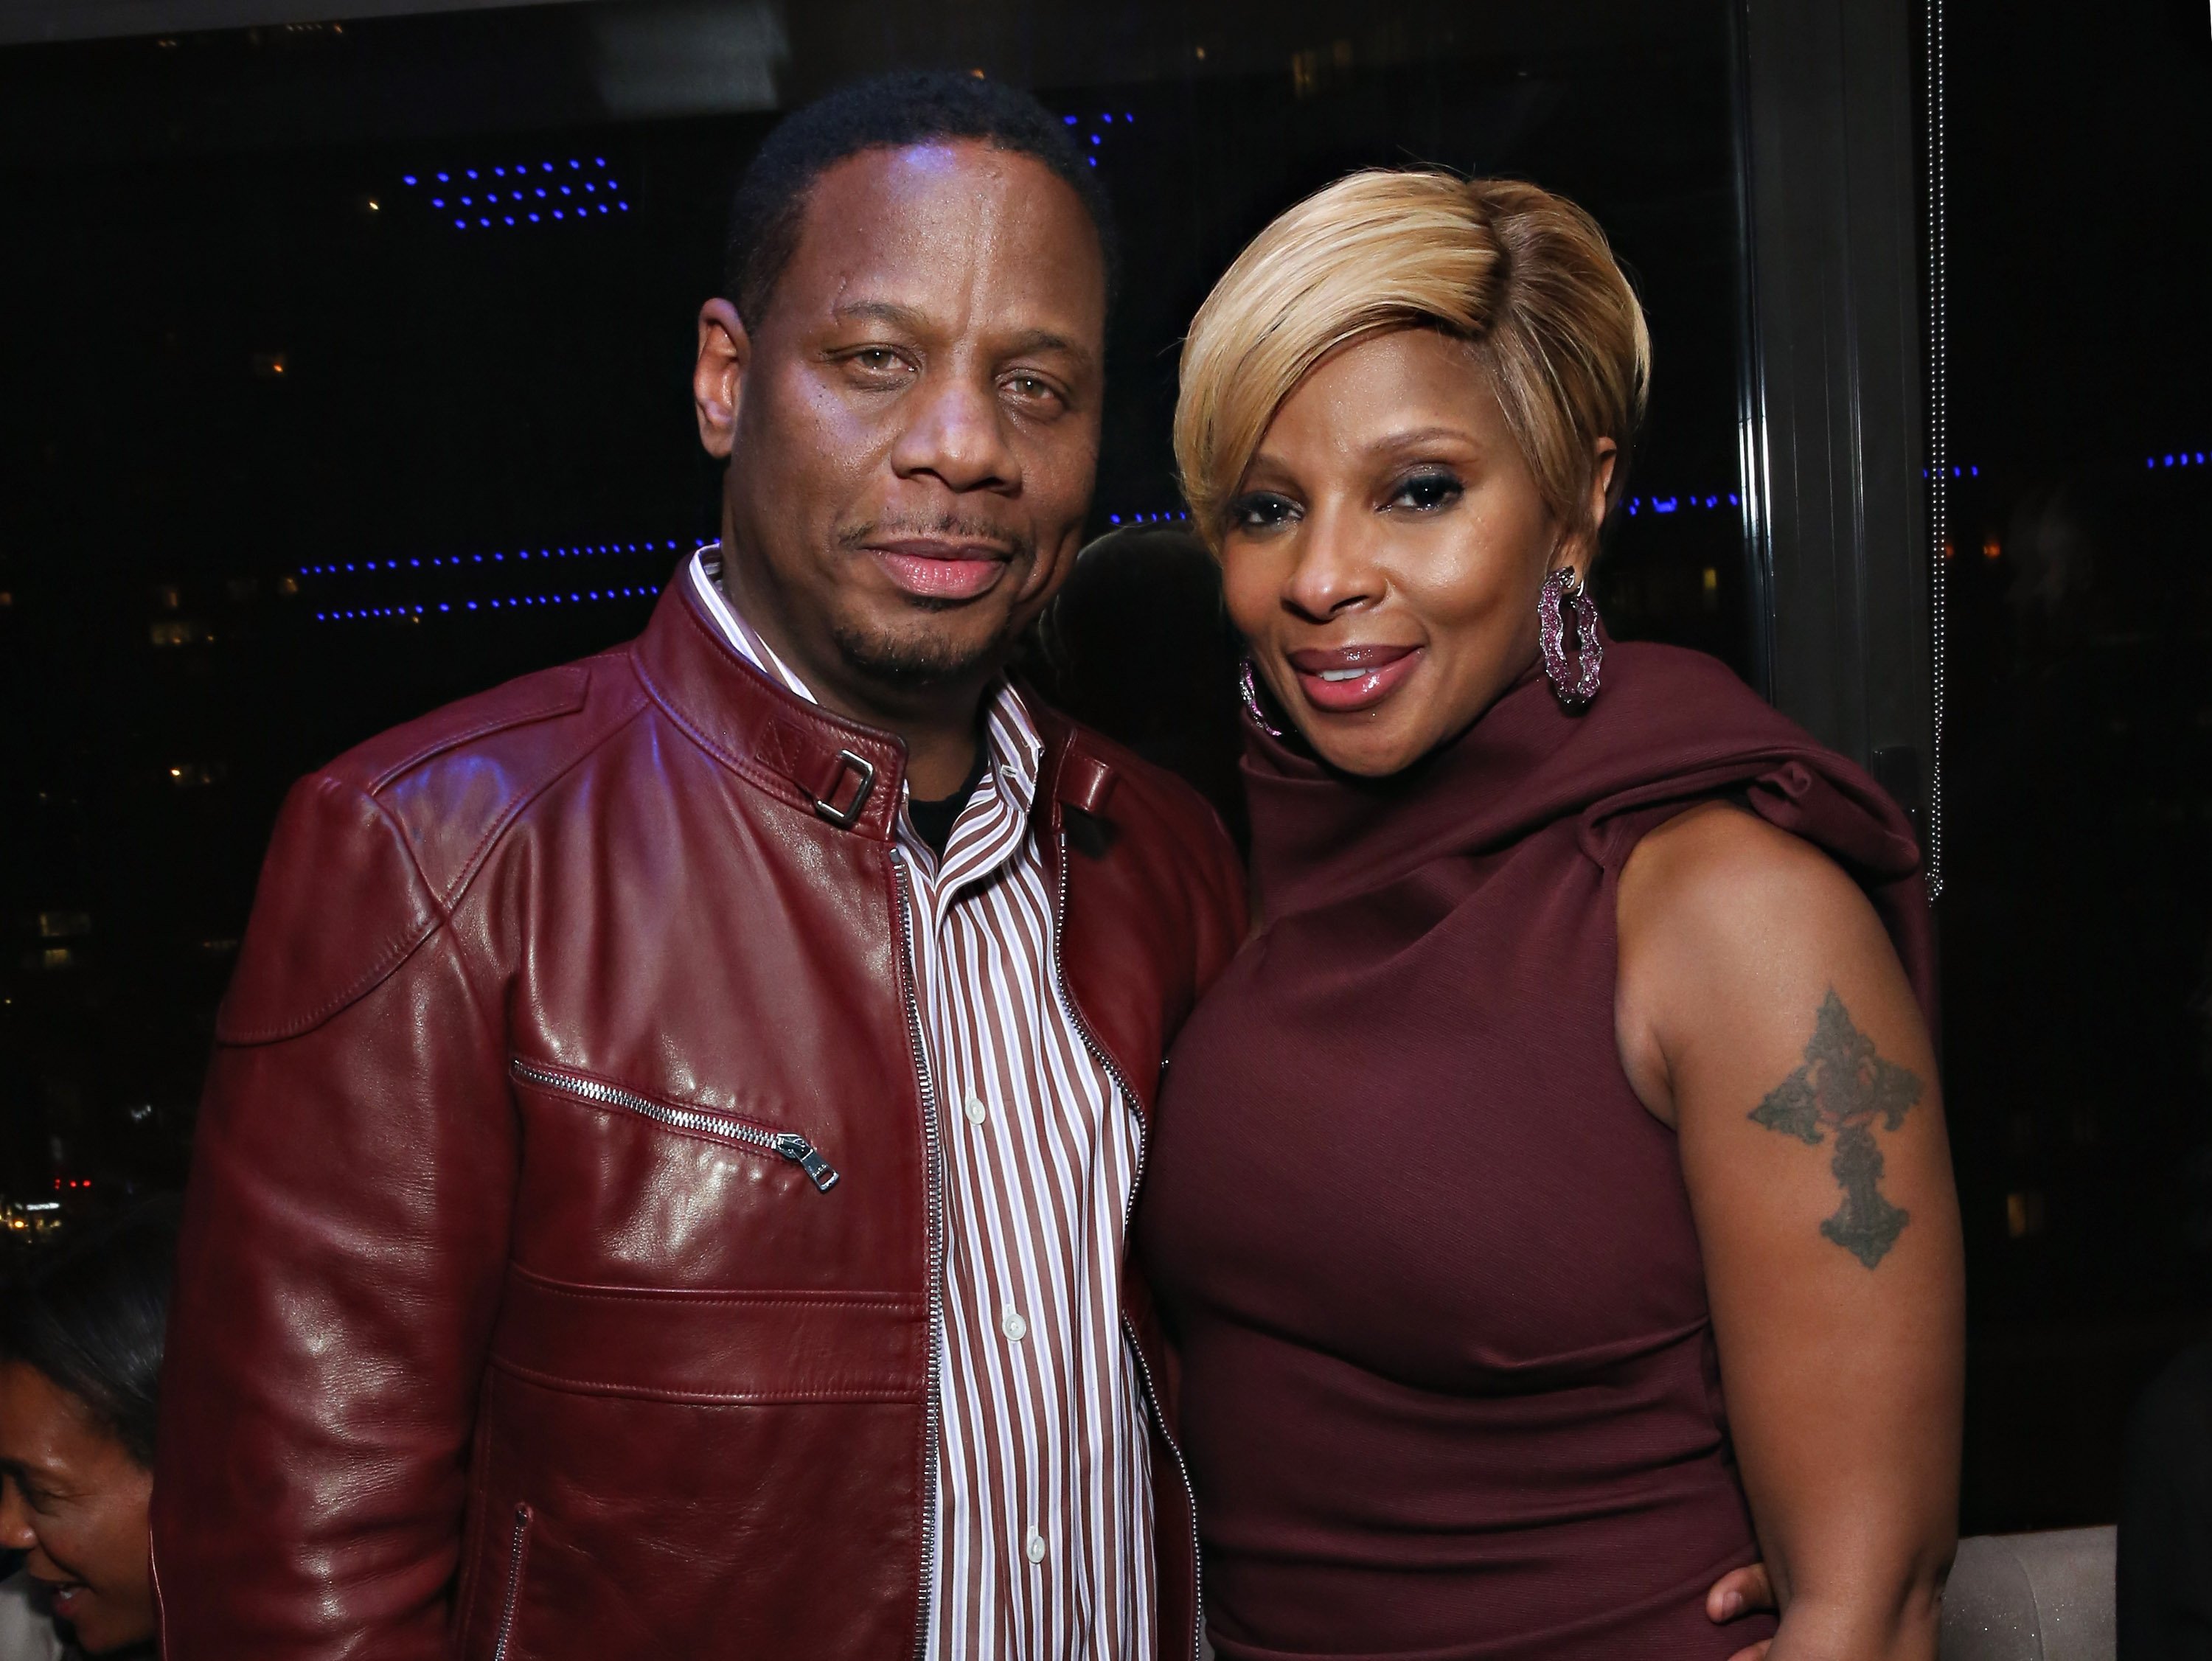 Mary J. Blige and Kendu Isaacs together